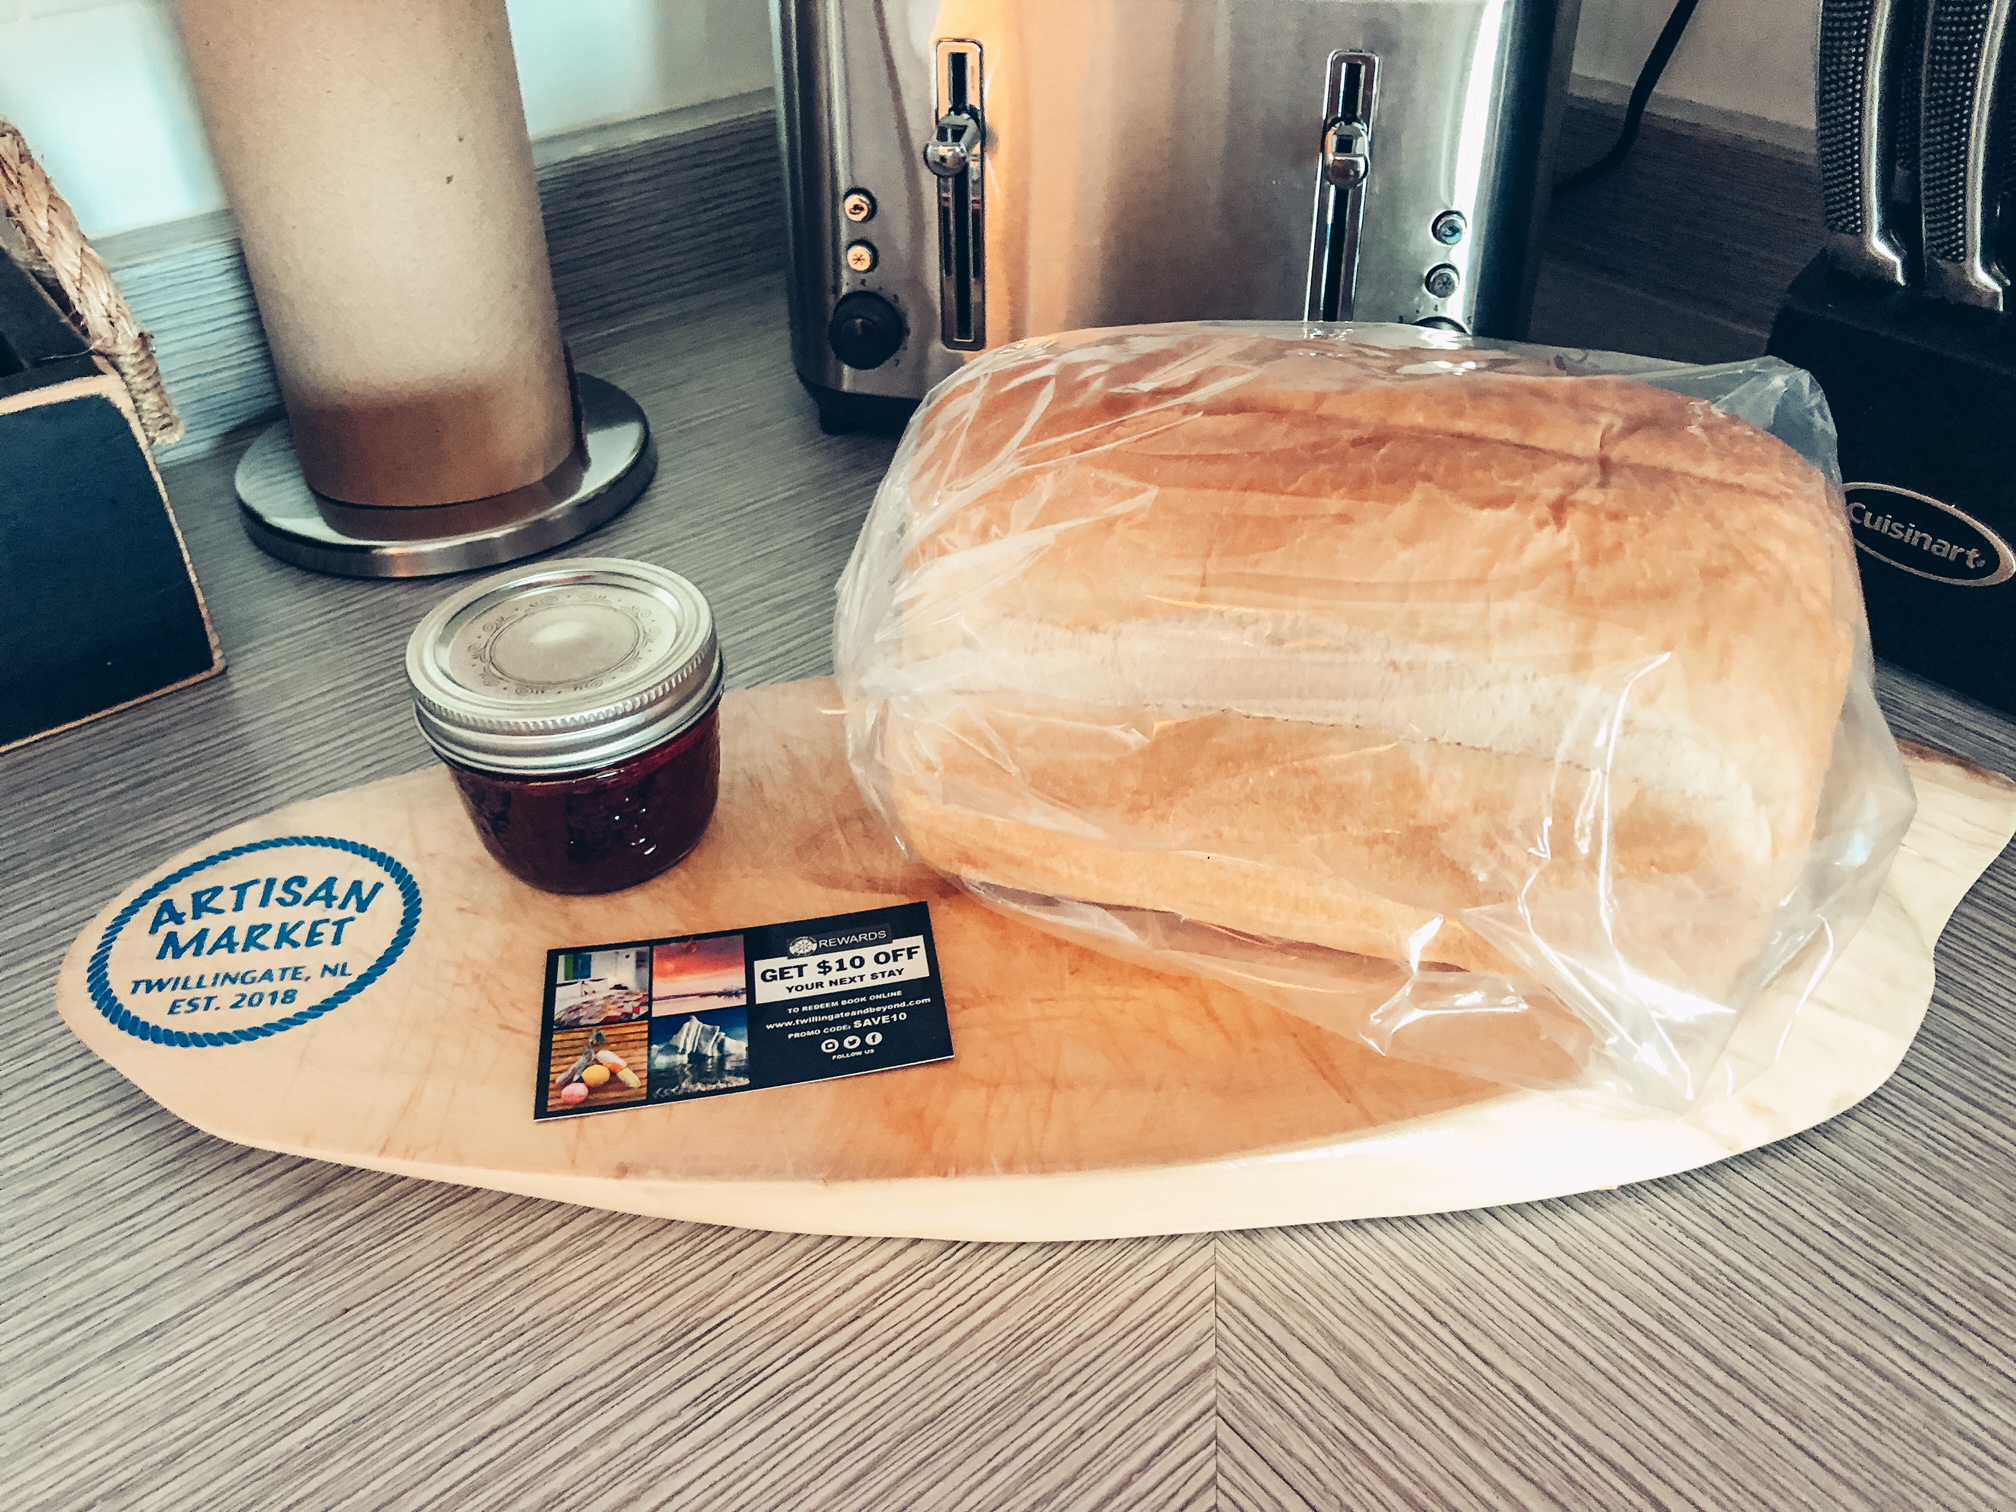 A photo of a fresh loaf of bread and some homemade jam on a cutting board.